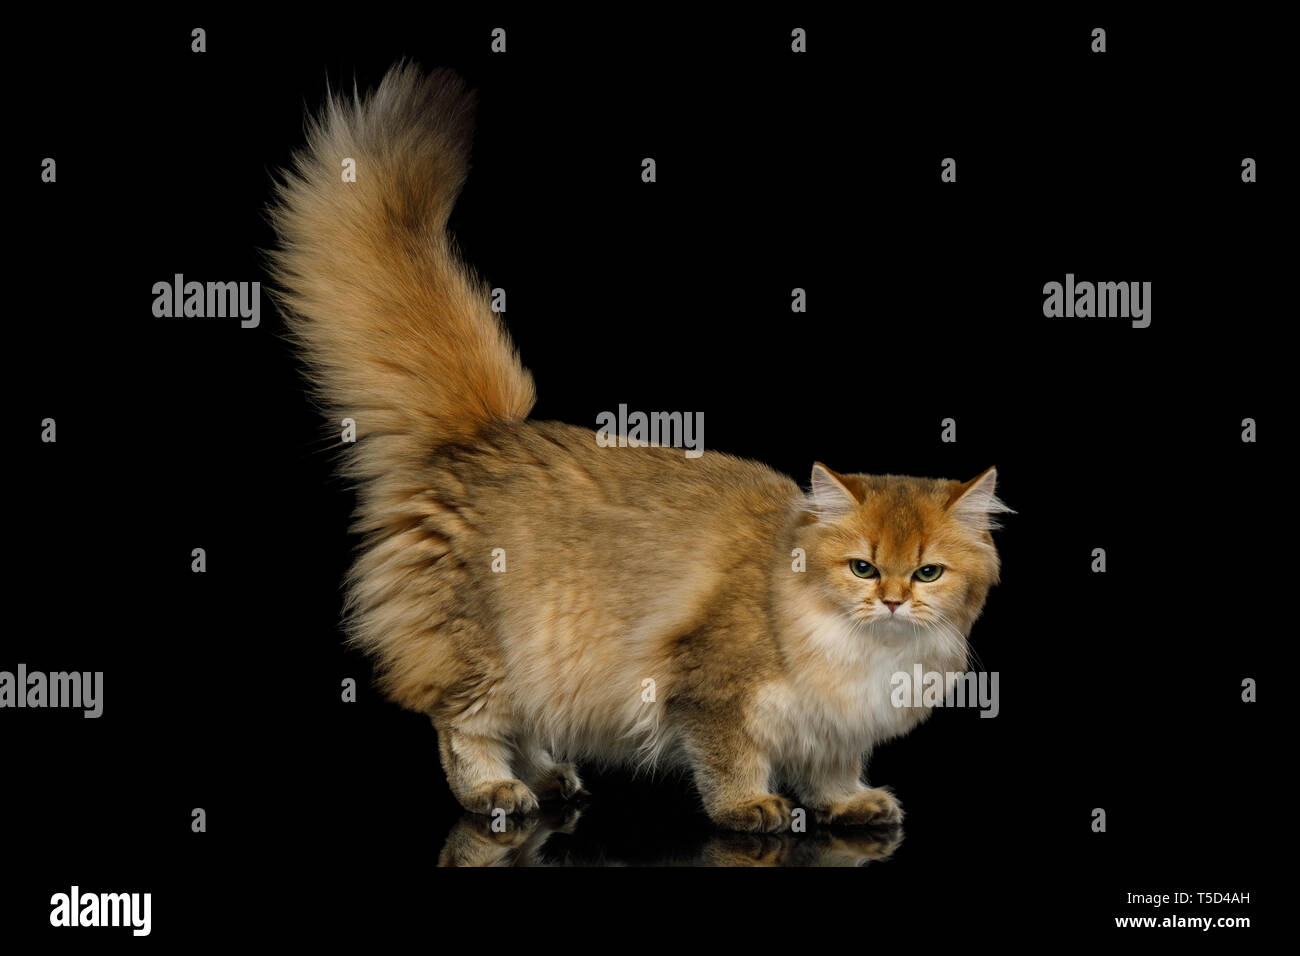 Angry British Red Cat with Furry tail and mad eyes on Isolated Black Background, side view Stock Photo